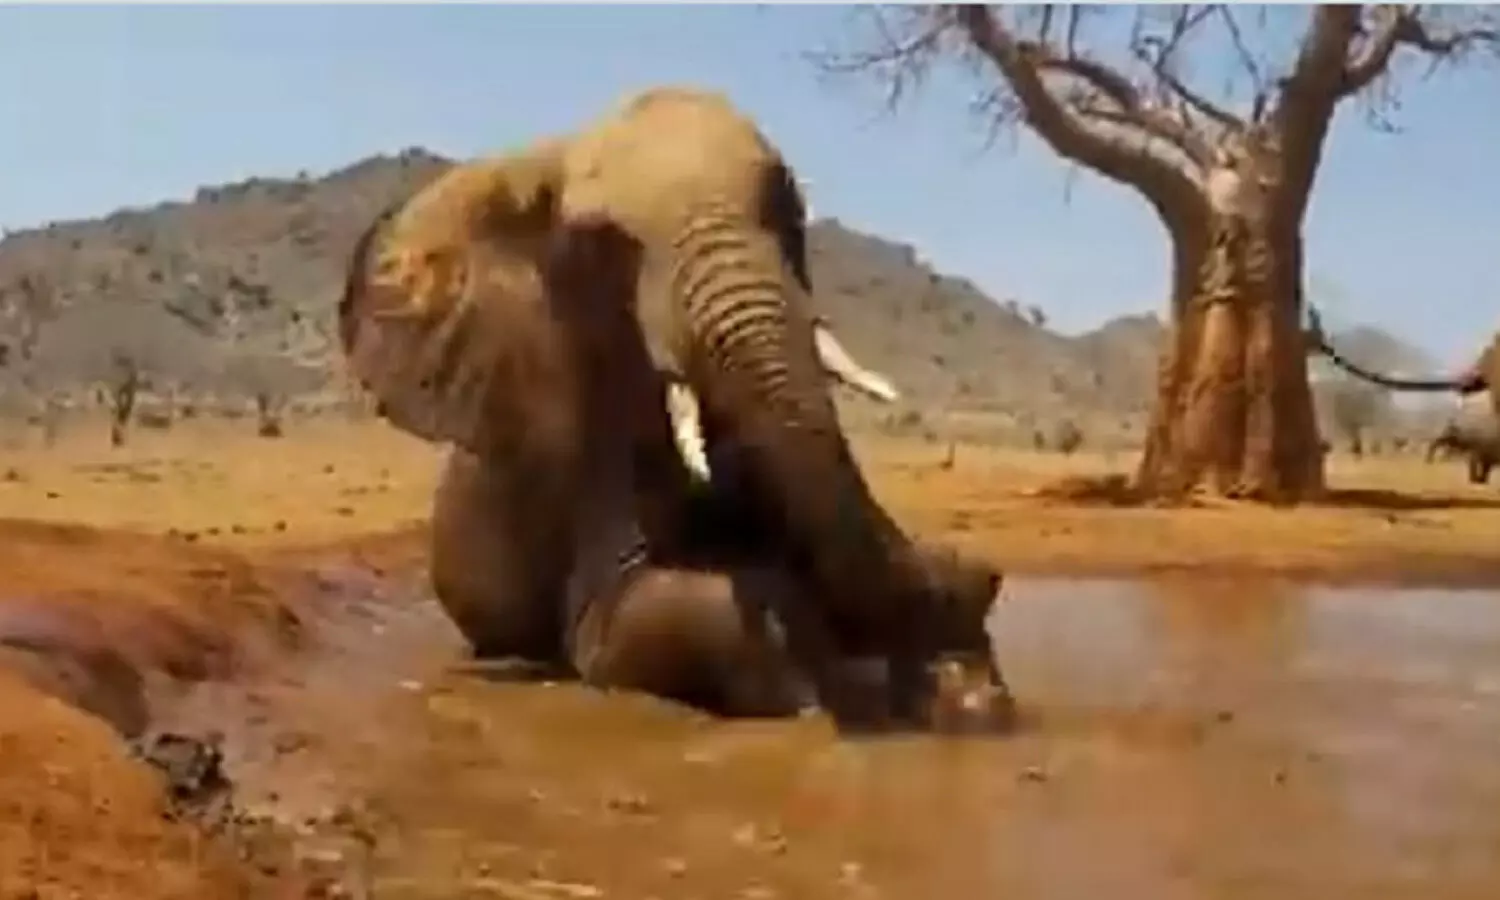 Elephant playing in a pool of mud